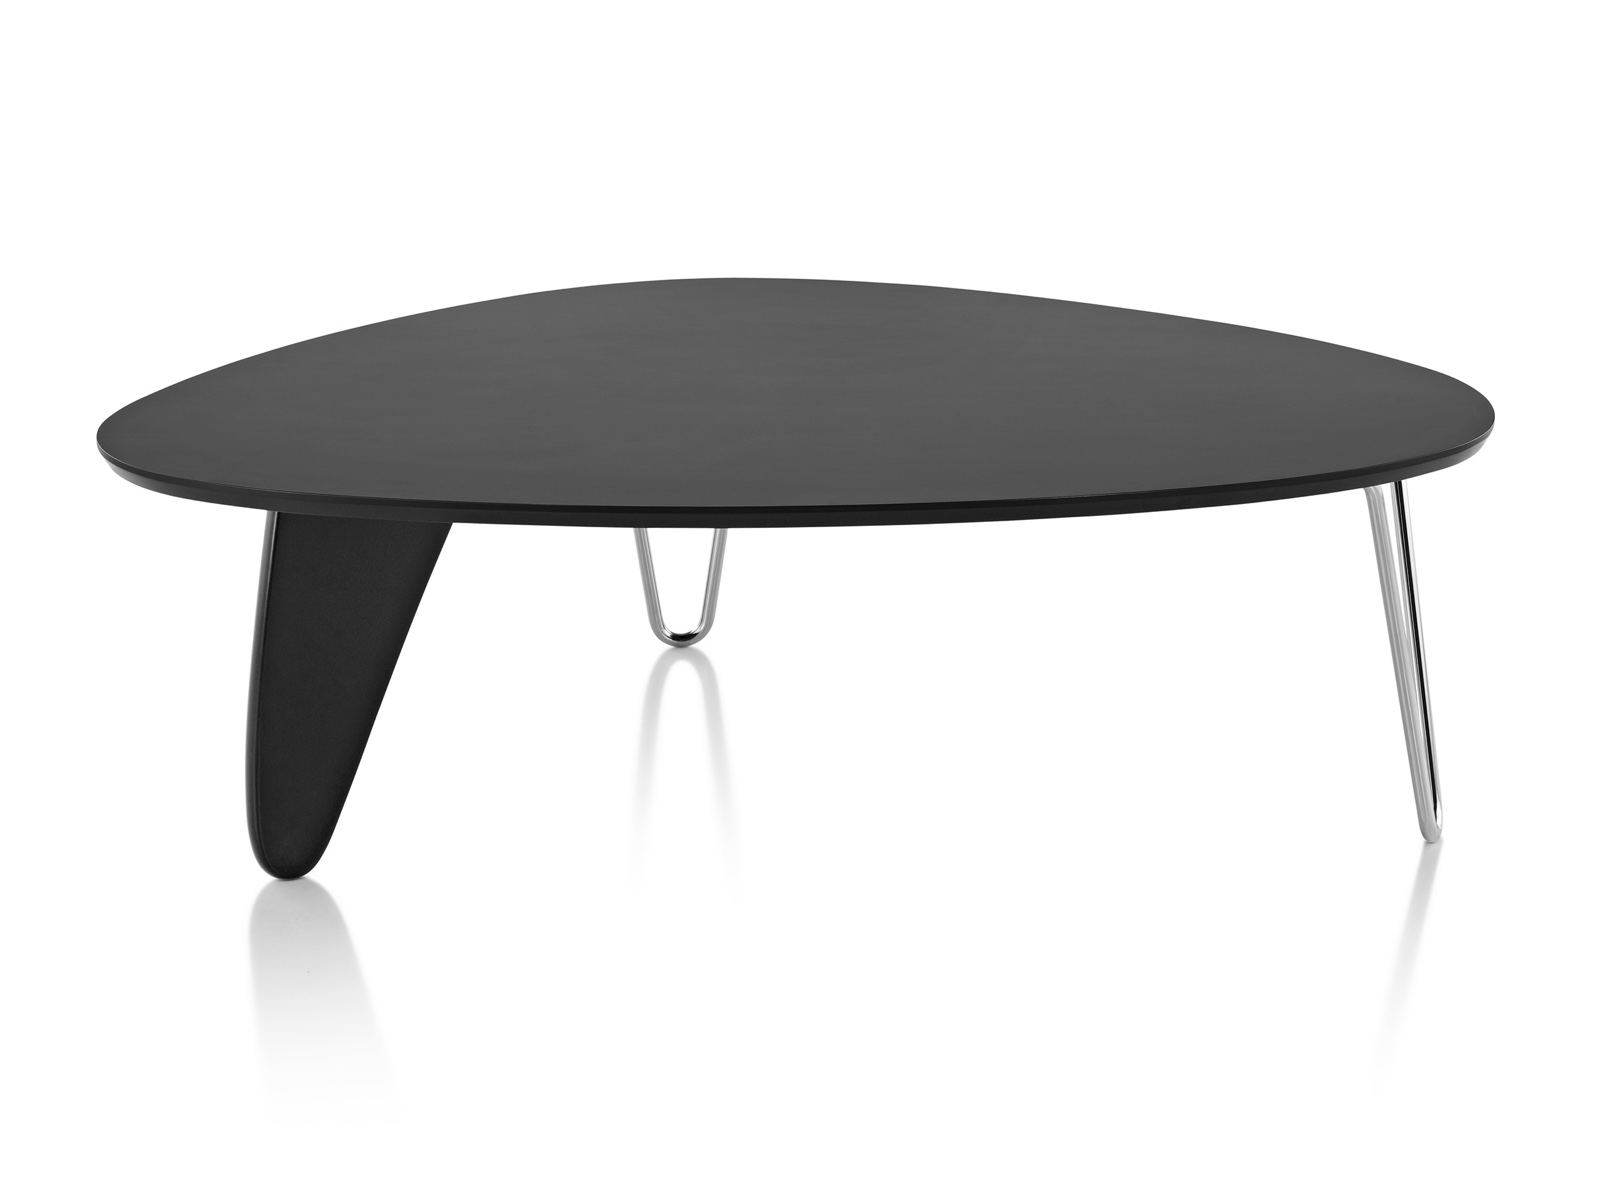 A Noguchi Rudder Table with a black finish. 